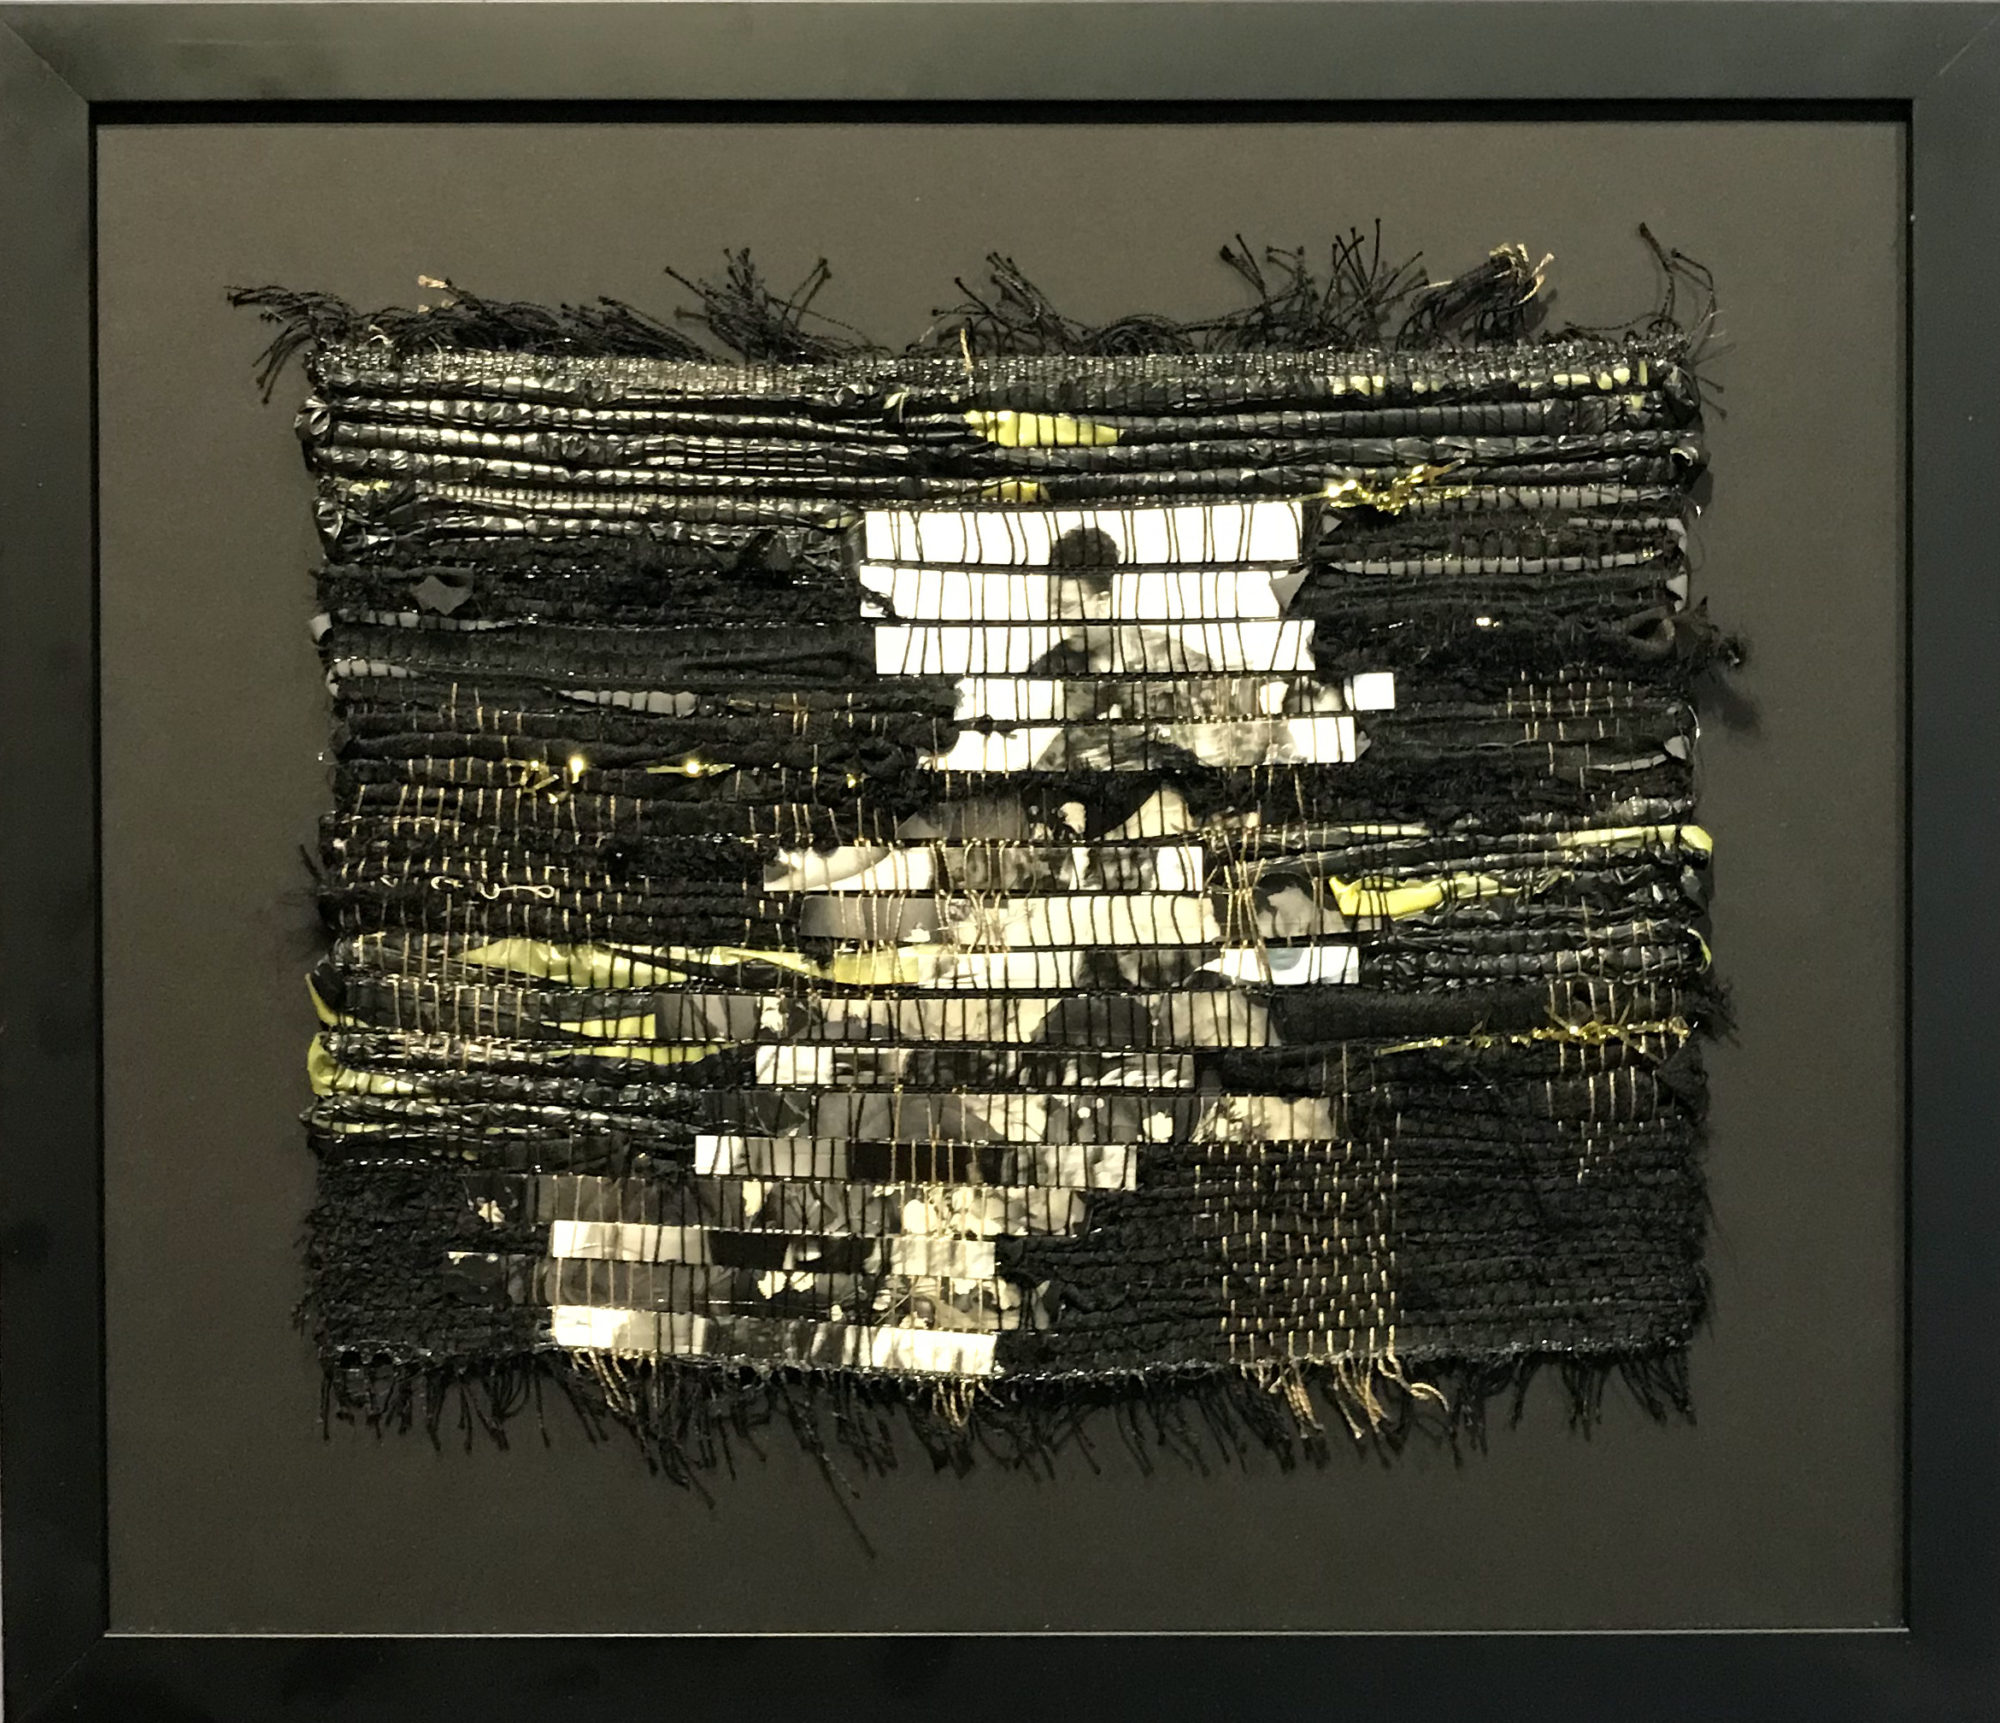 A rug-like patch, into which a photograph depicting human figures is woven, is attached to a black picture frame.